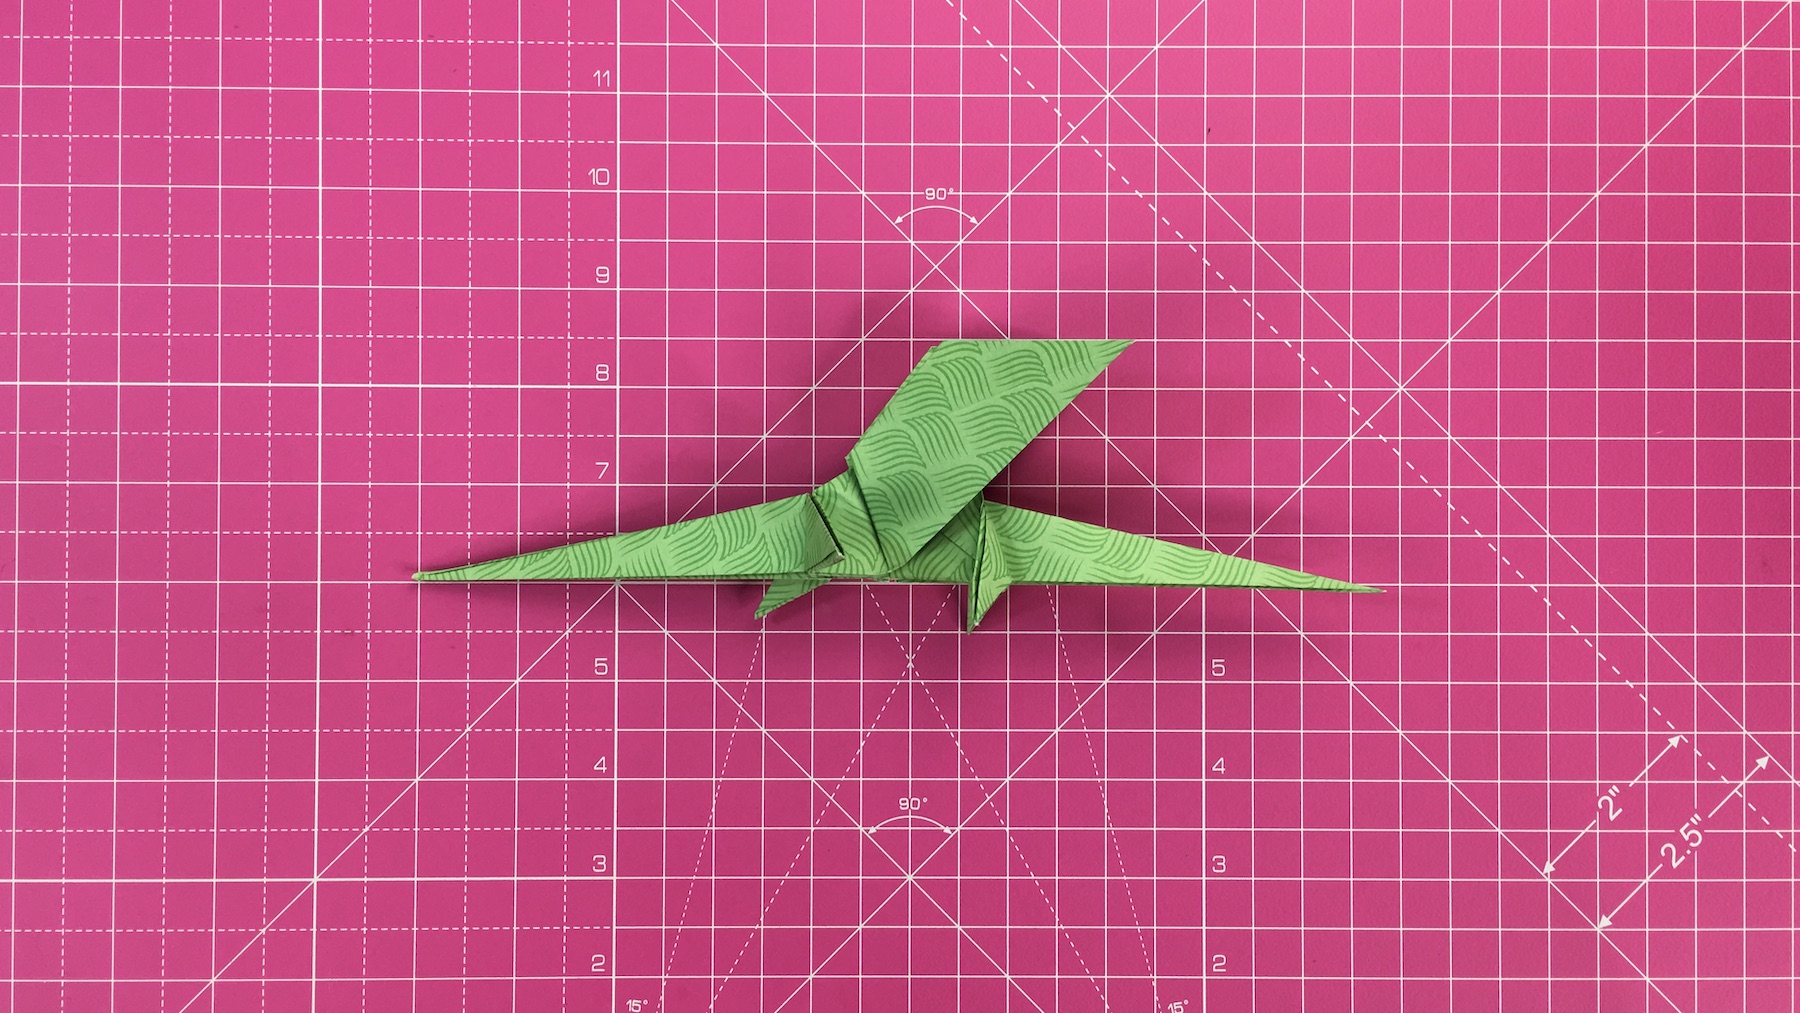 How to make an origami dragon, origami dragon tutorial - step 43